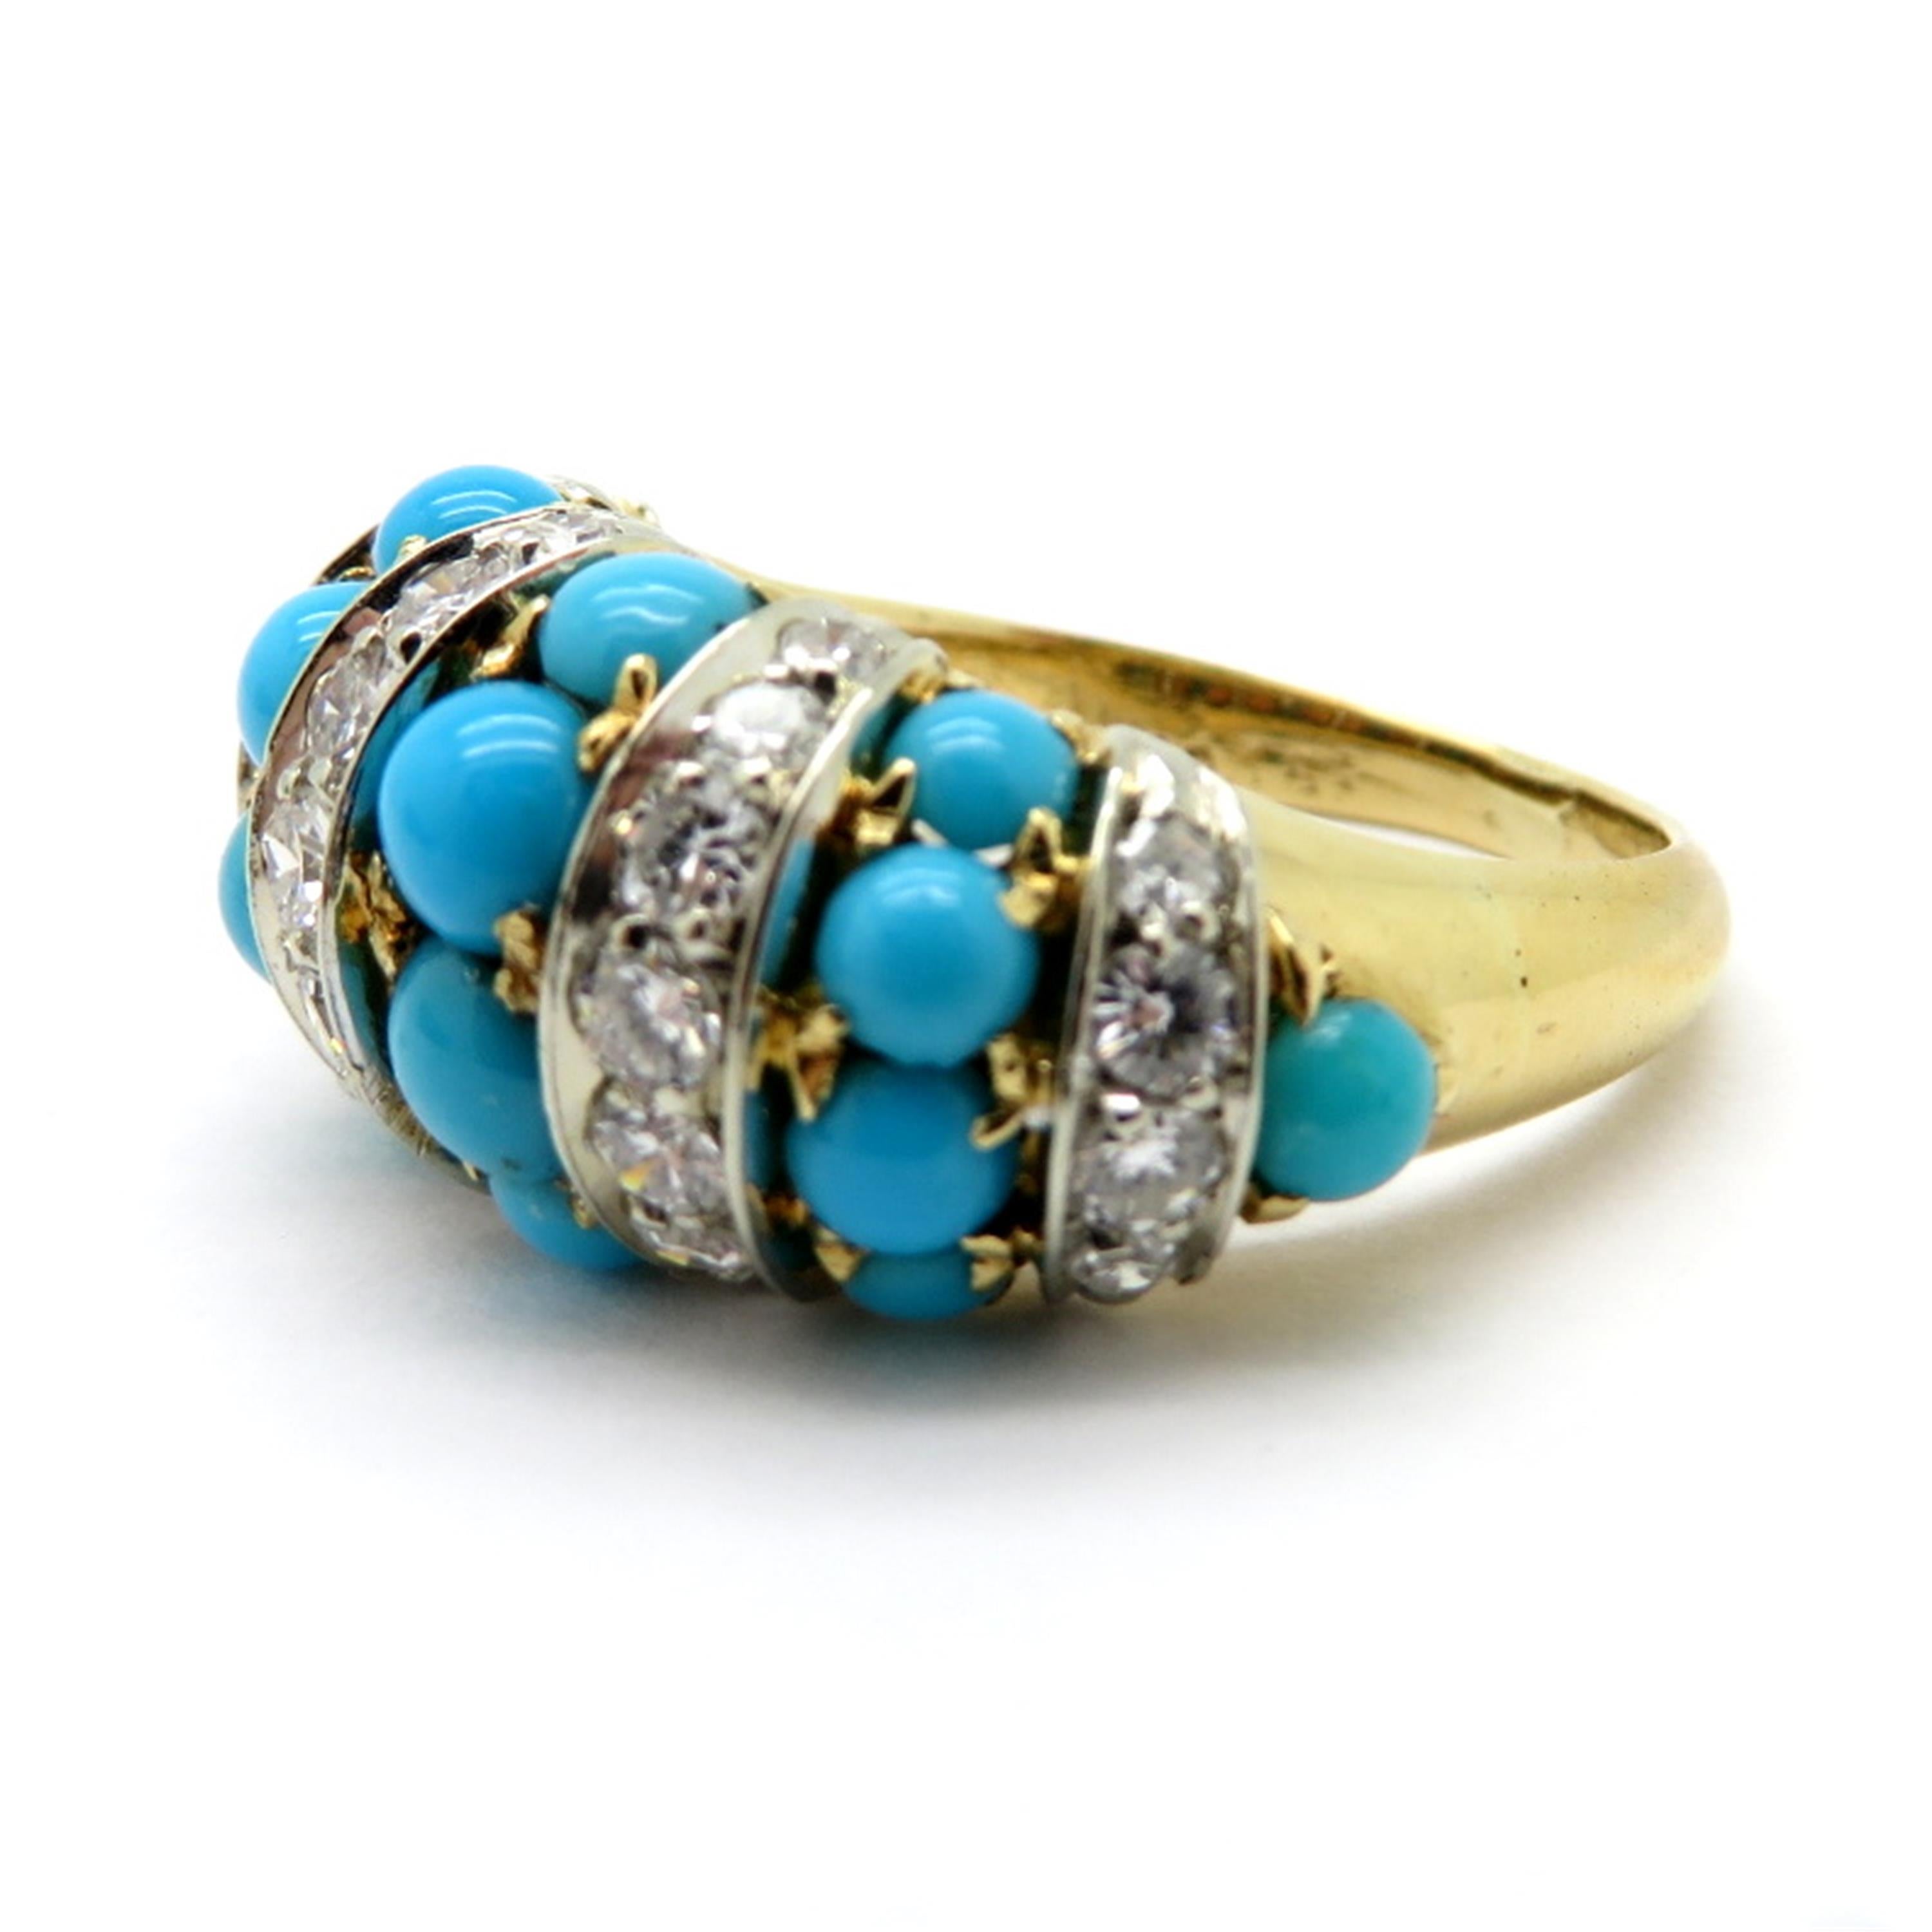 Designer Tiffany & Co.  Persian turquoise 18K yellow gold diamond ring. Interspersed with 29 round brilliant cut micro prong set diamonds weighing a combined total of approximately 1.00 carat. Diamond grading: color grade: F. Clarity grade: VS1.